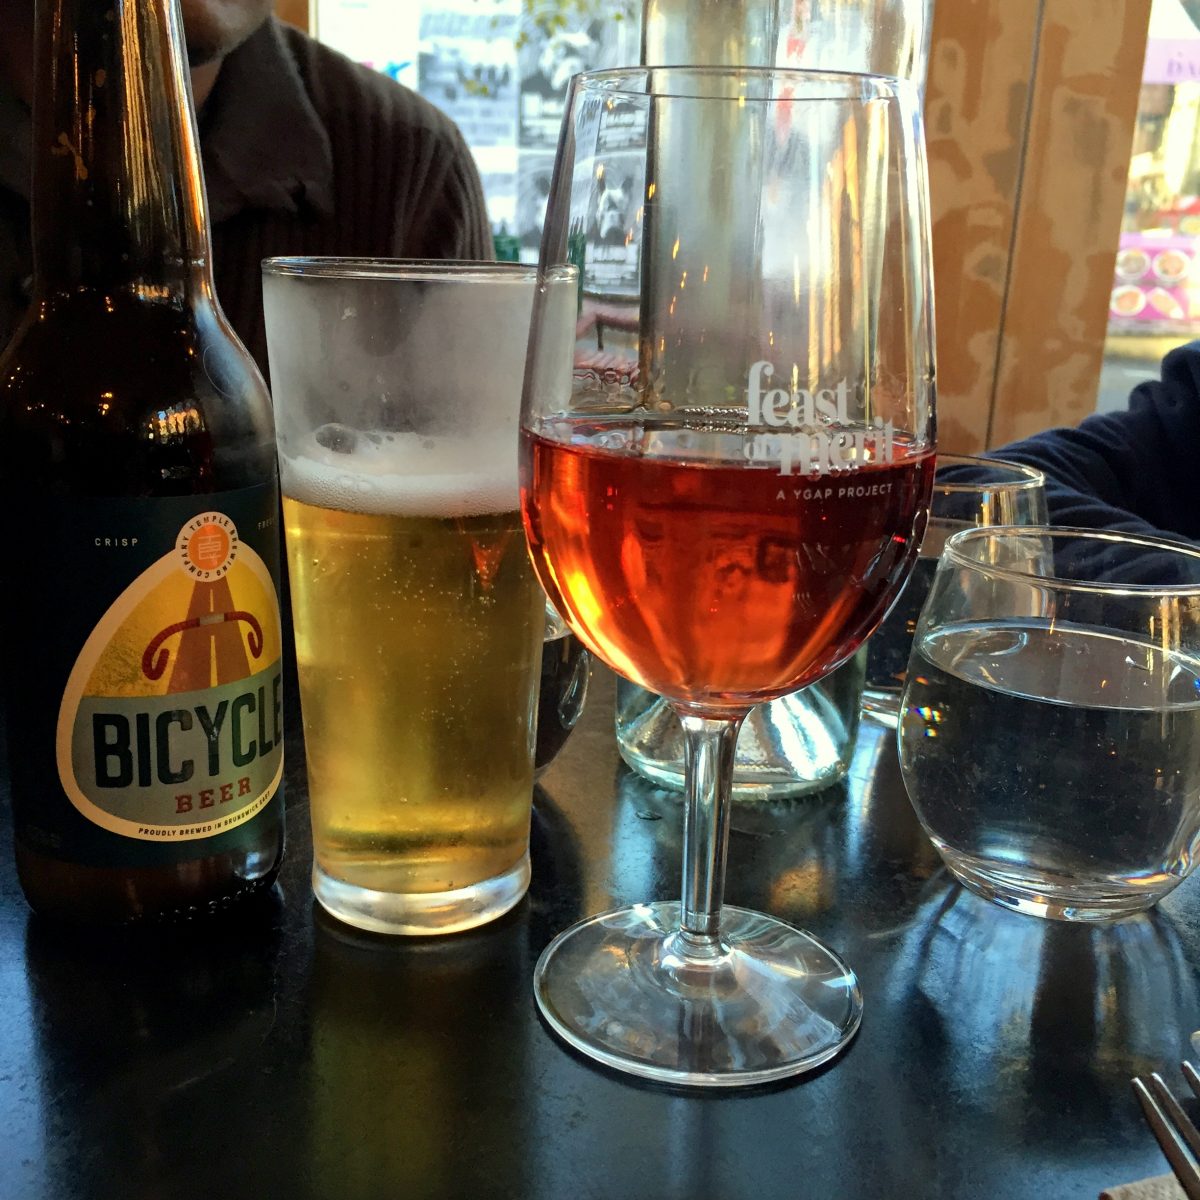 Bicycle Beer, ’14 Alta ‘for Elise’ Pinot Noir Rose